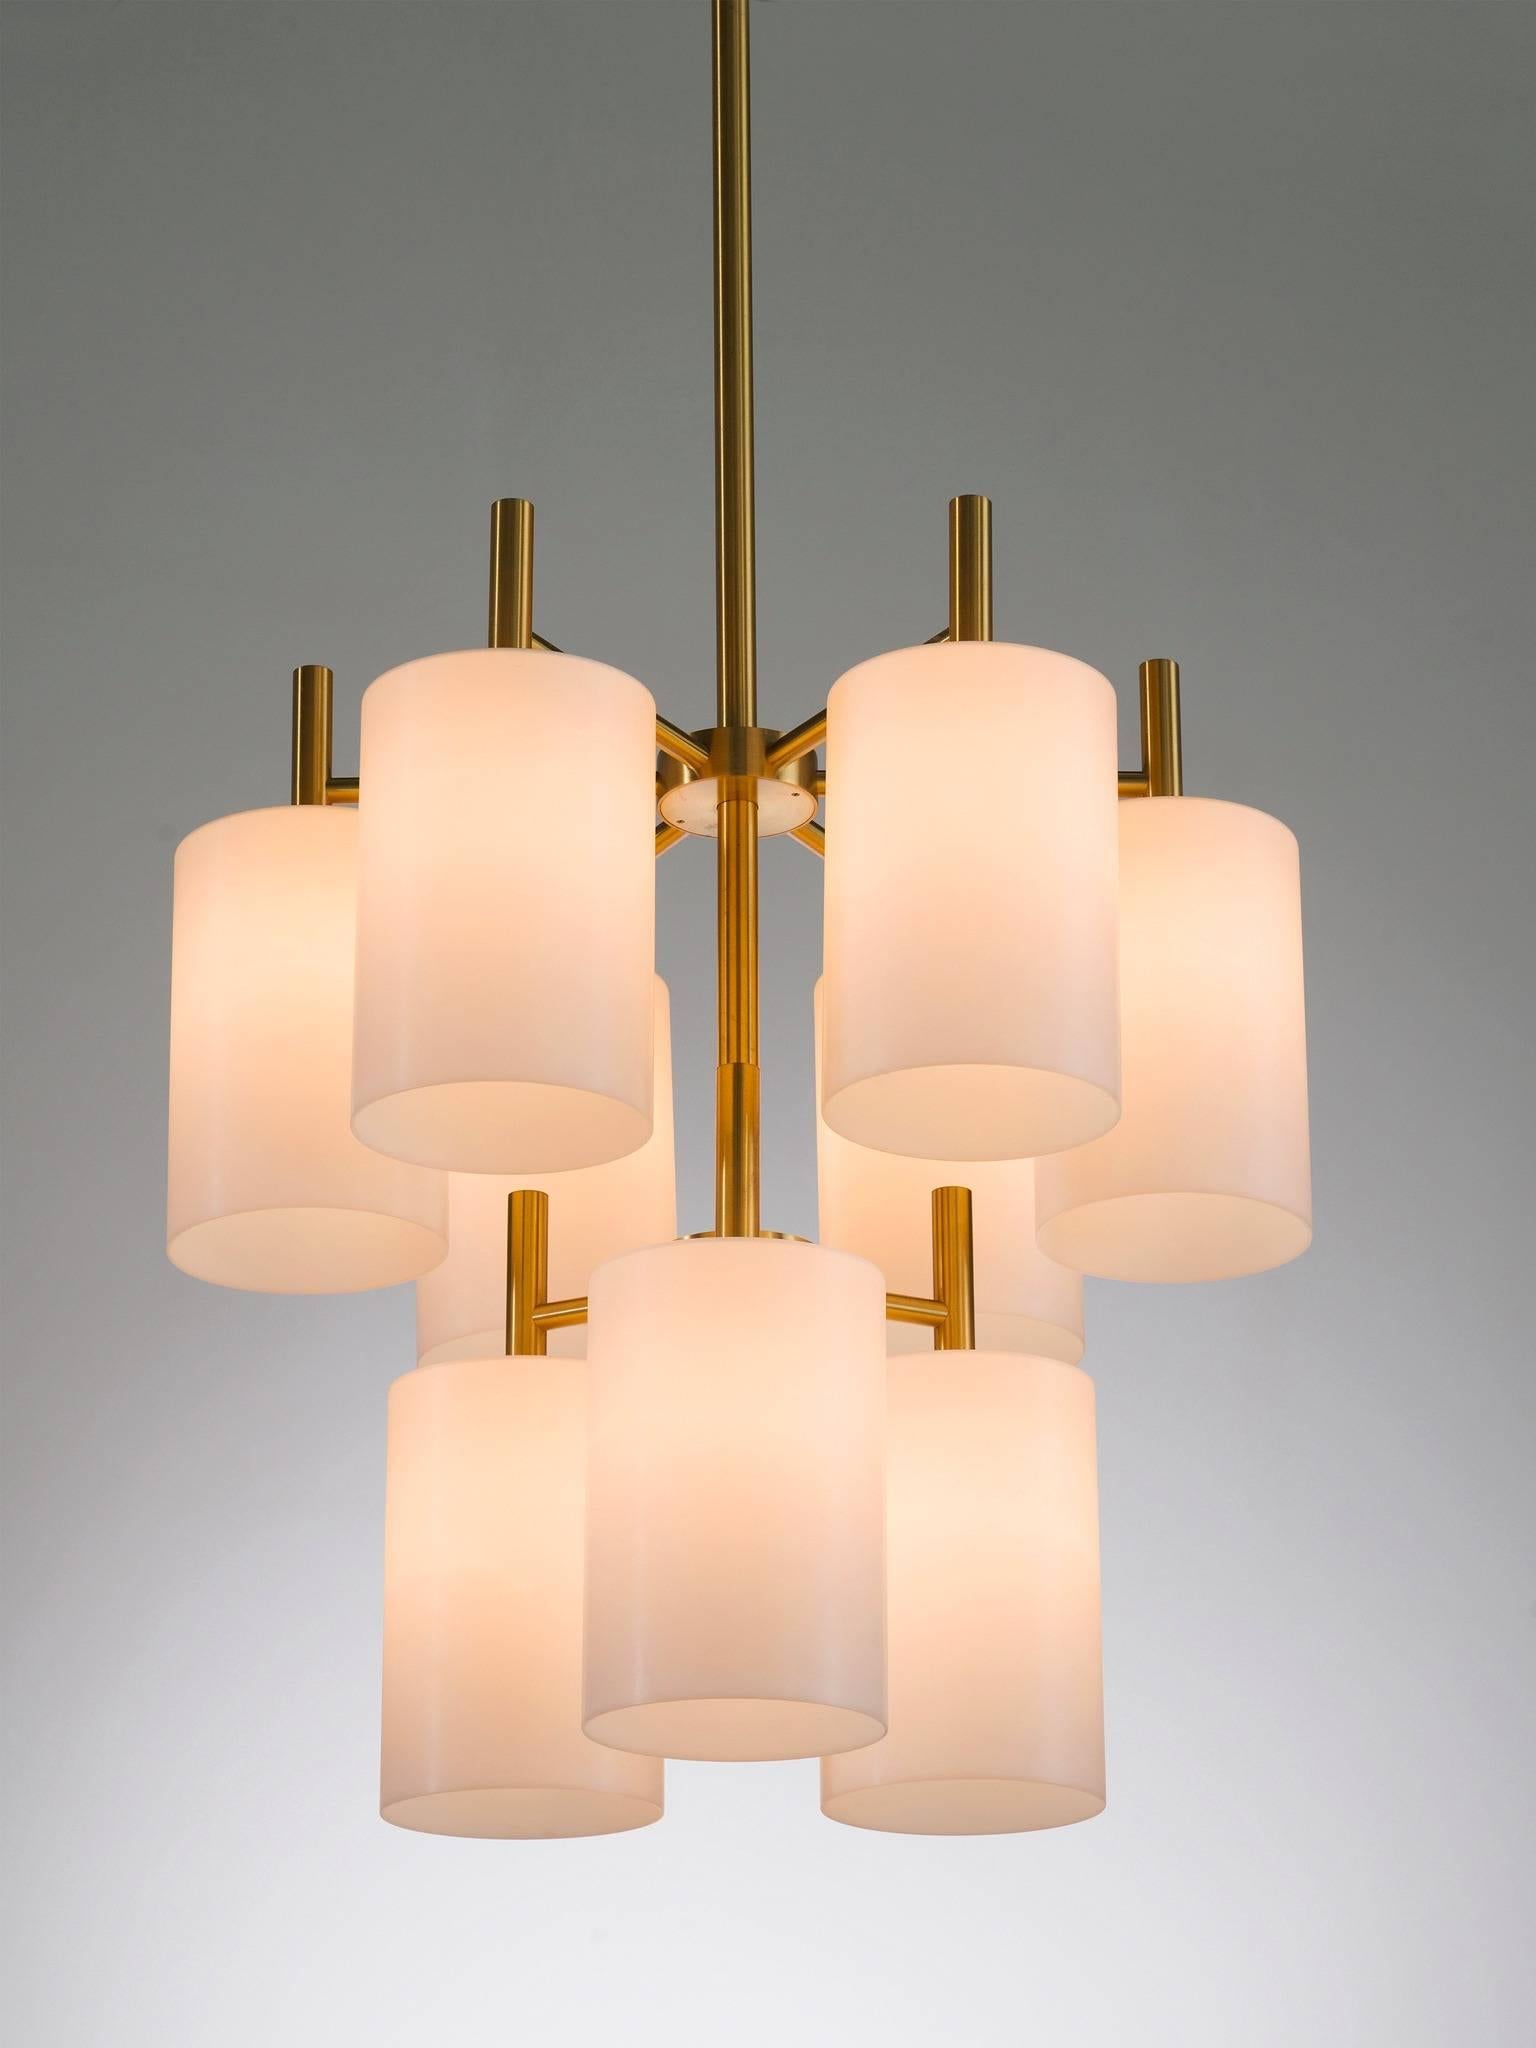 Pendants with nine cylindric white Lucite and brass, Luxus, Sweden, 1960s.

This chandelier is made of brass and the tall stem with nine branches that all end with a downwards facing cone. The symmetry and geometric form of make this a very